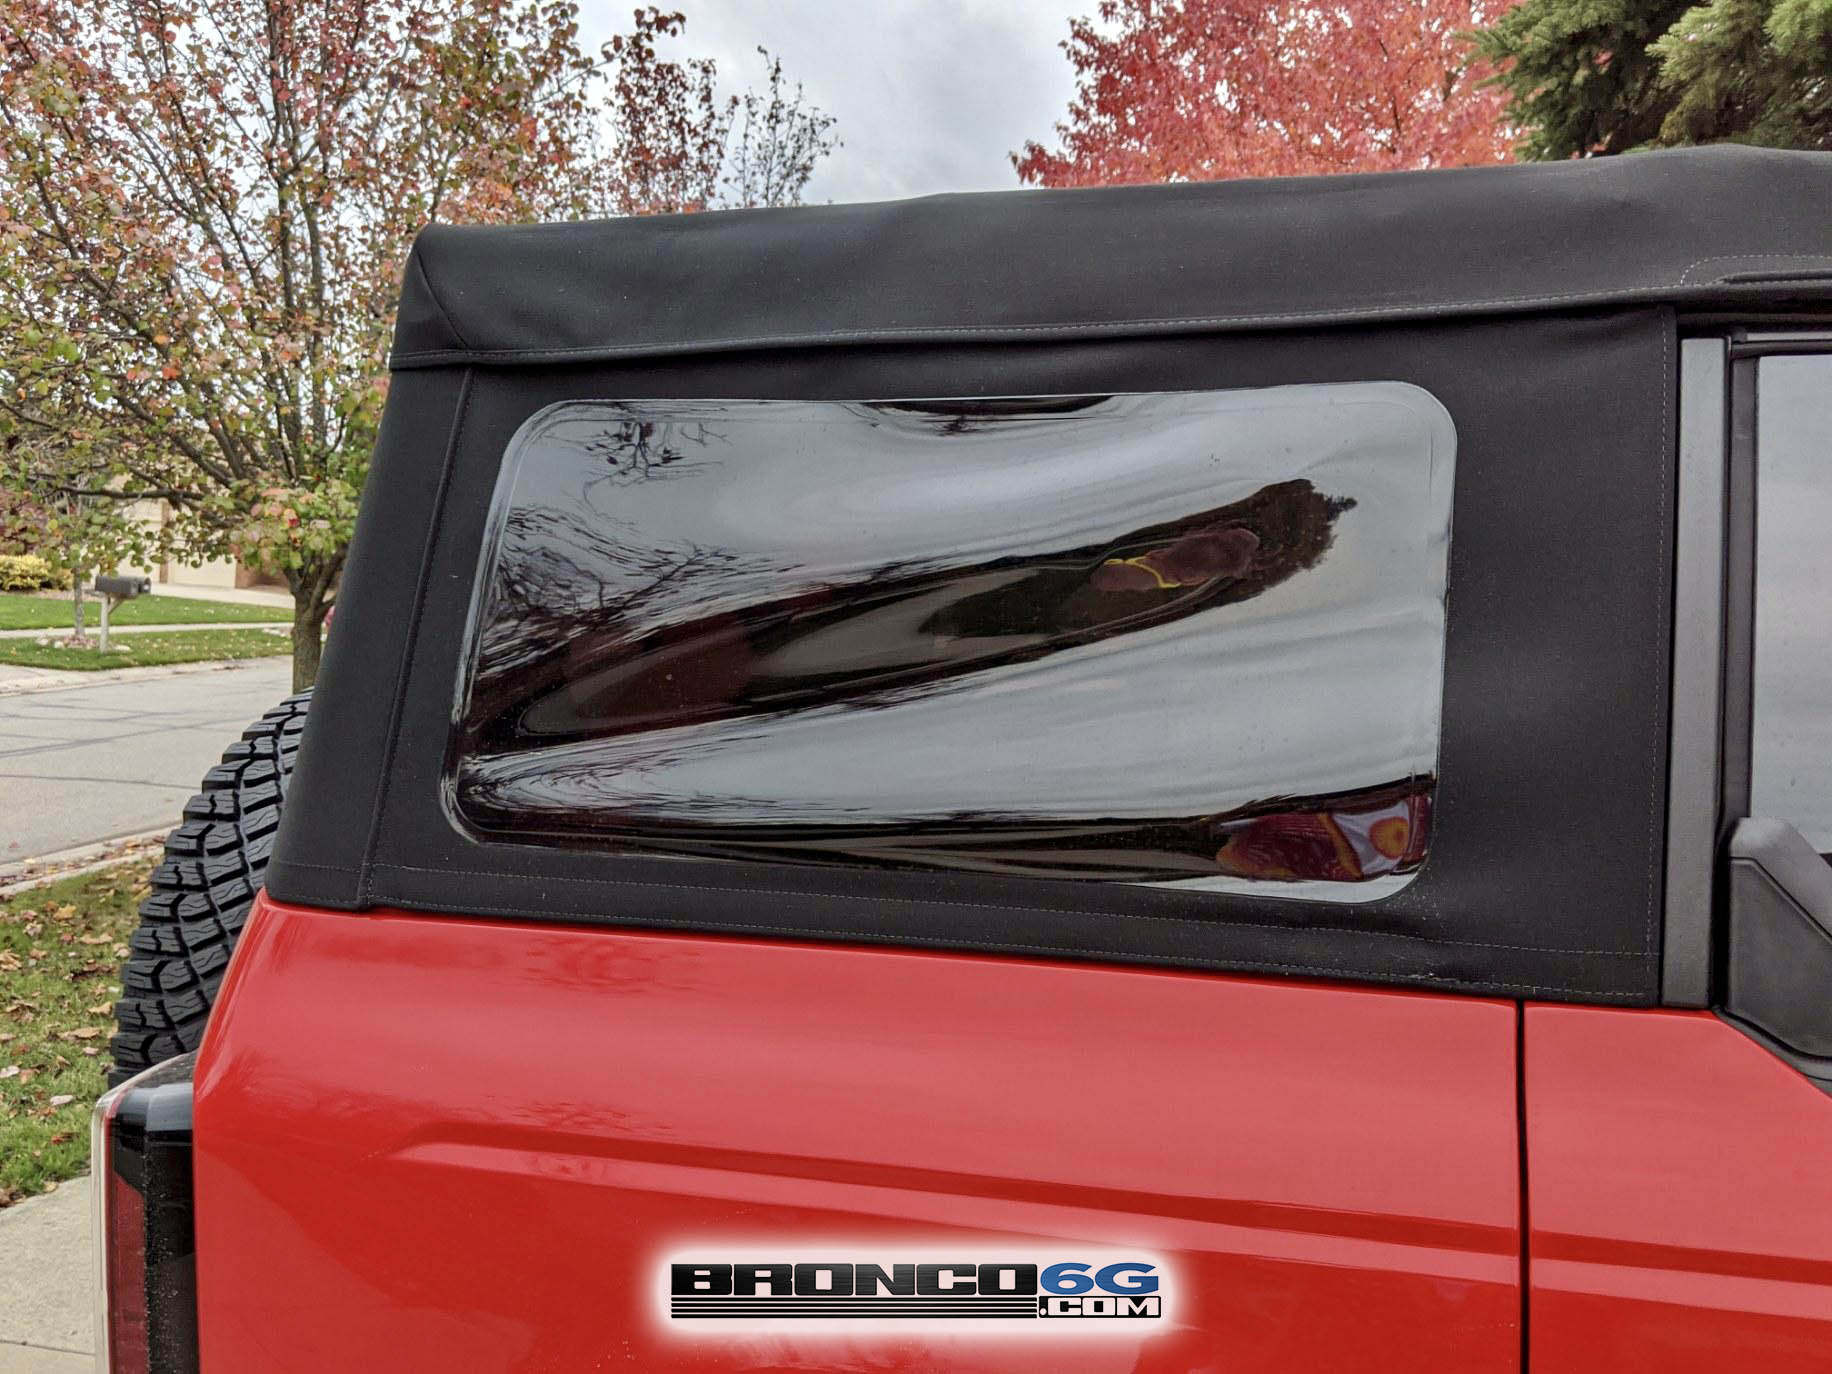 Ford Bronco Possible Bronco Soft Top Rear Opening Feature Pic! + Carbonized Gray Badlands race-red-wildtrak-bronco-4-door-soft-top-14-